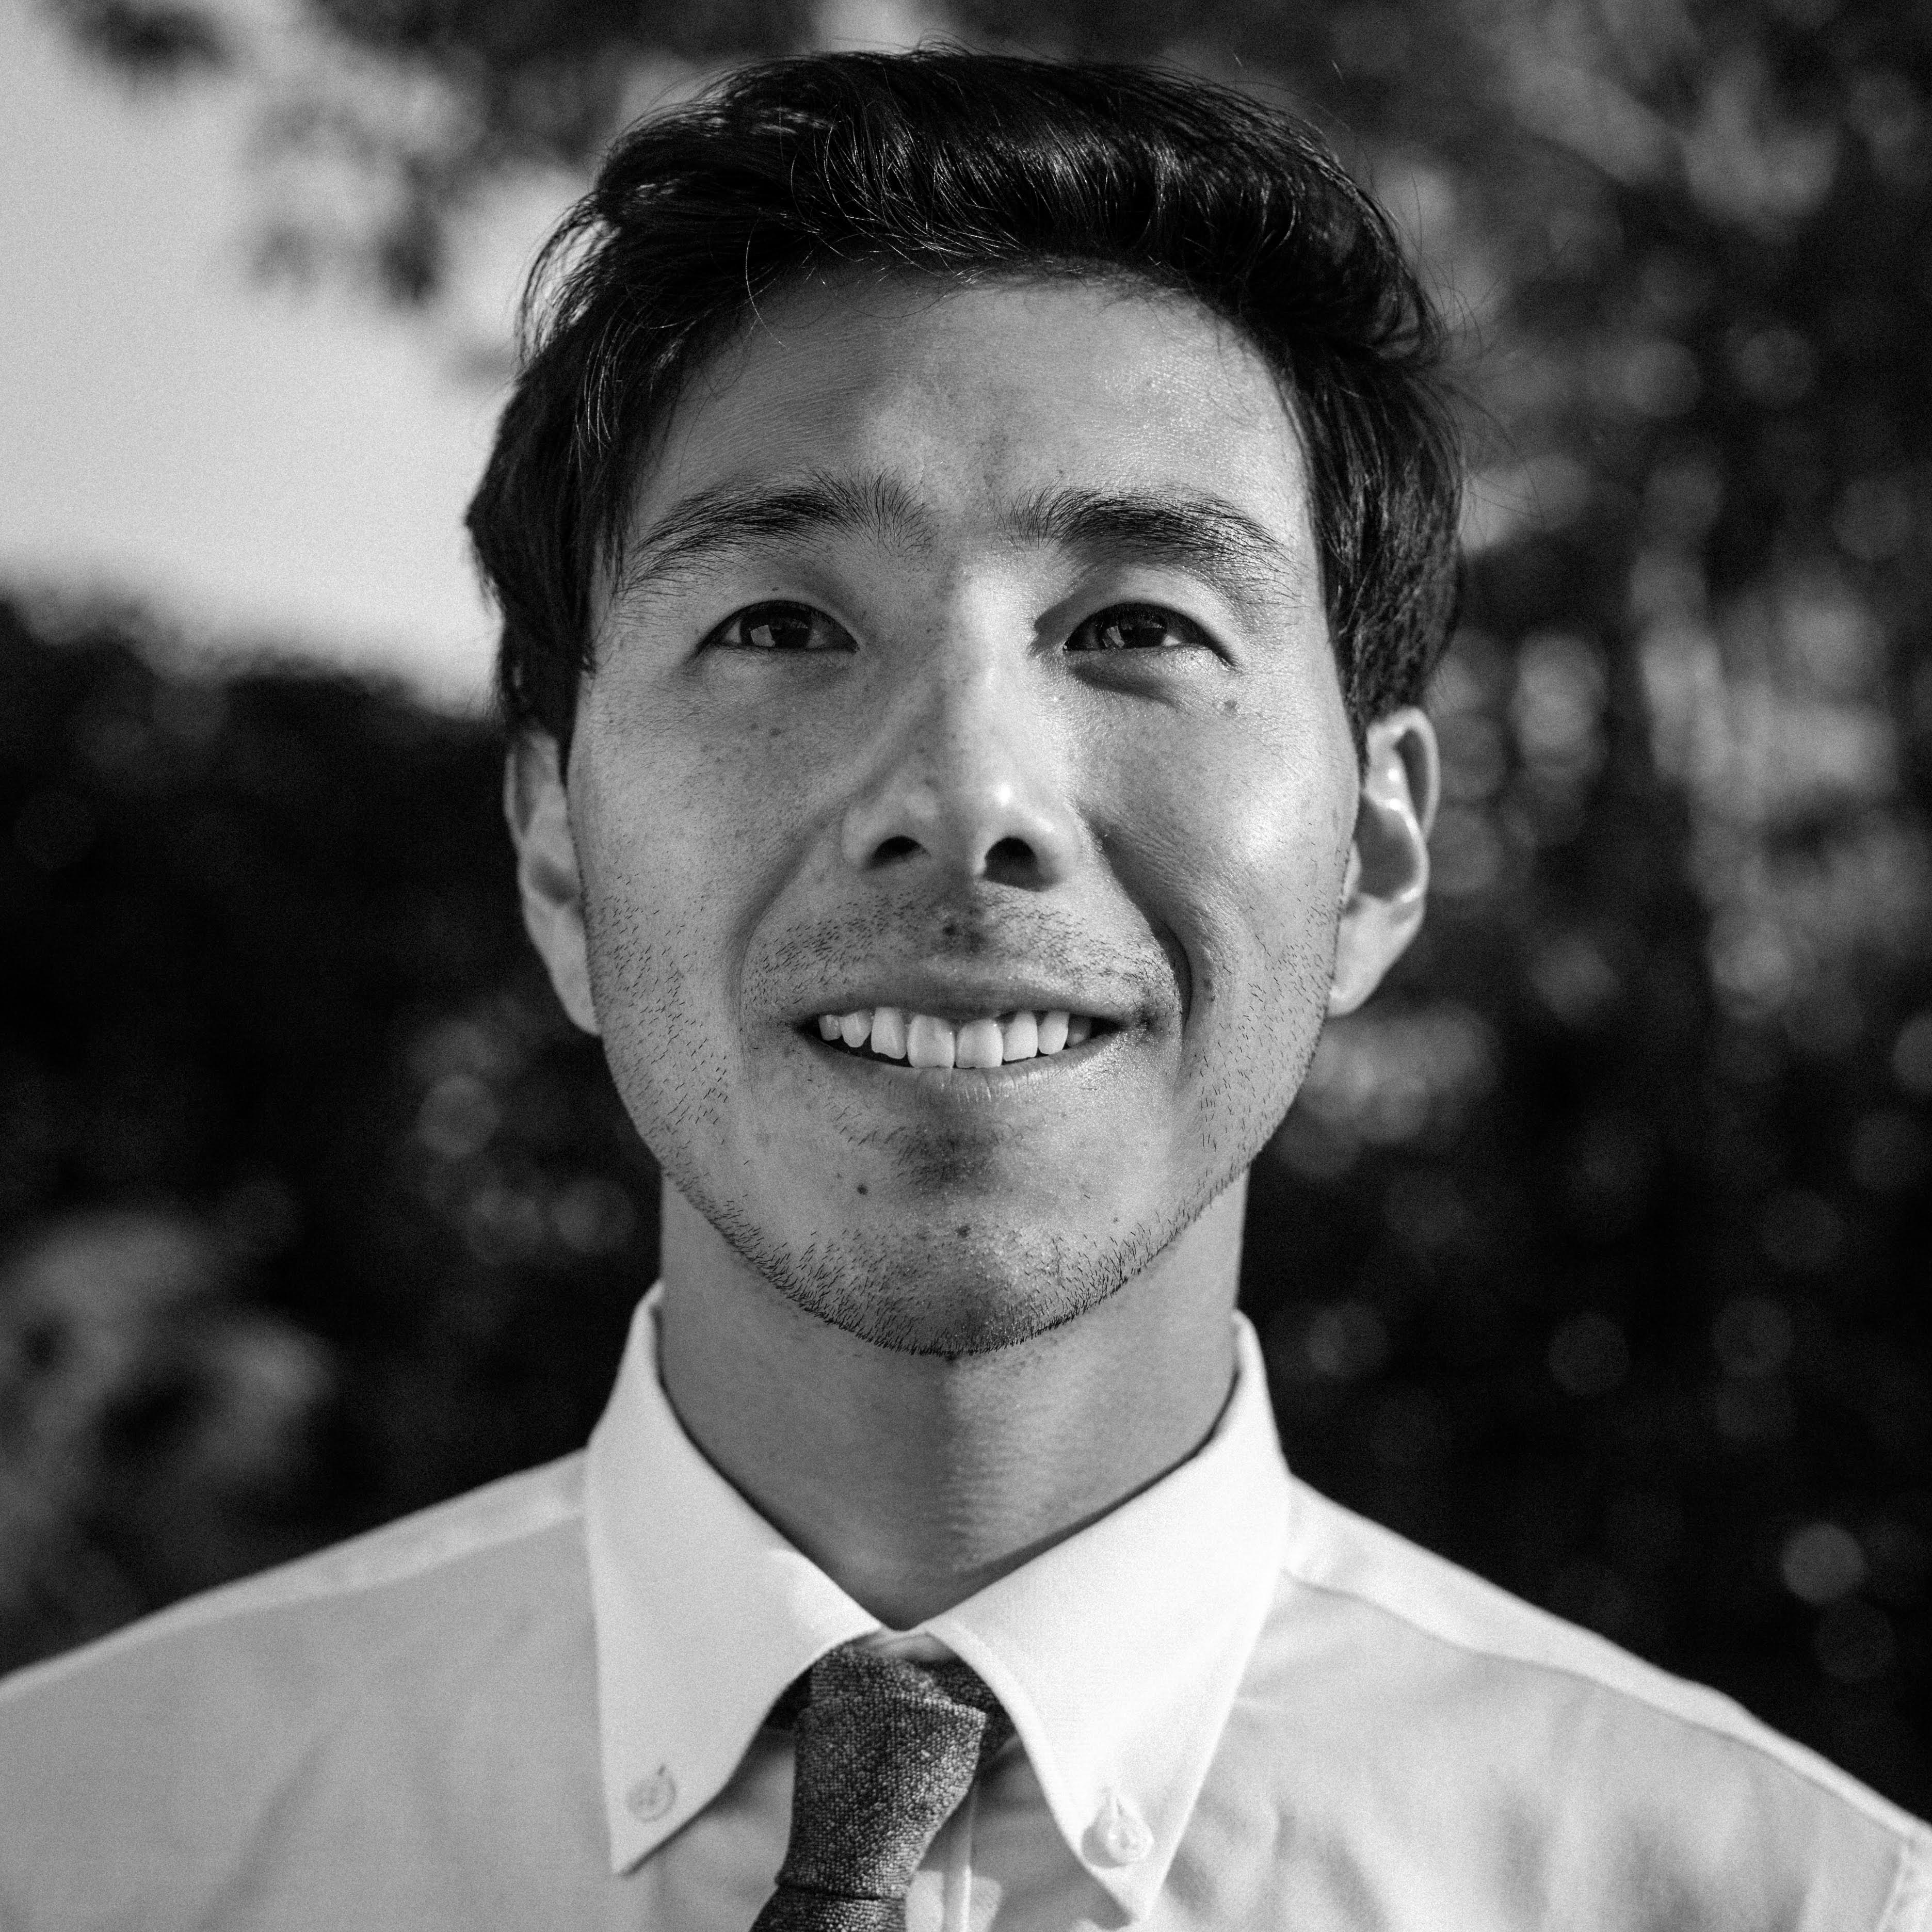 Black and white headshot of Garrett Oyama, a Japanese-American man, smiling and looking up. He&#39;s wearing a white suit shirt and tie. There are trees in the background.